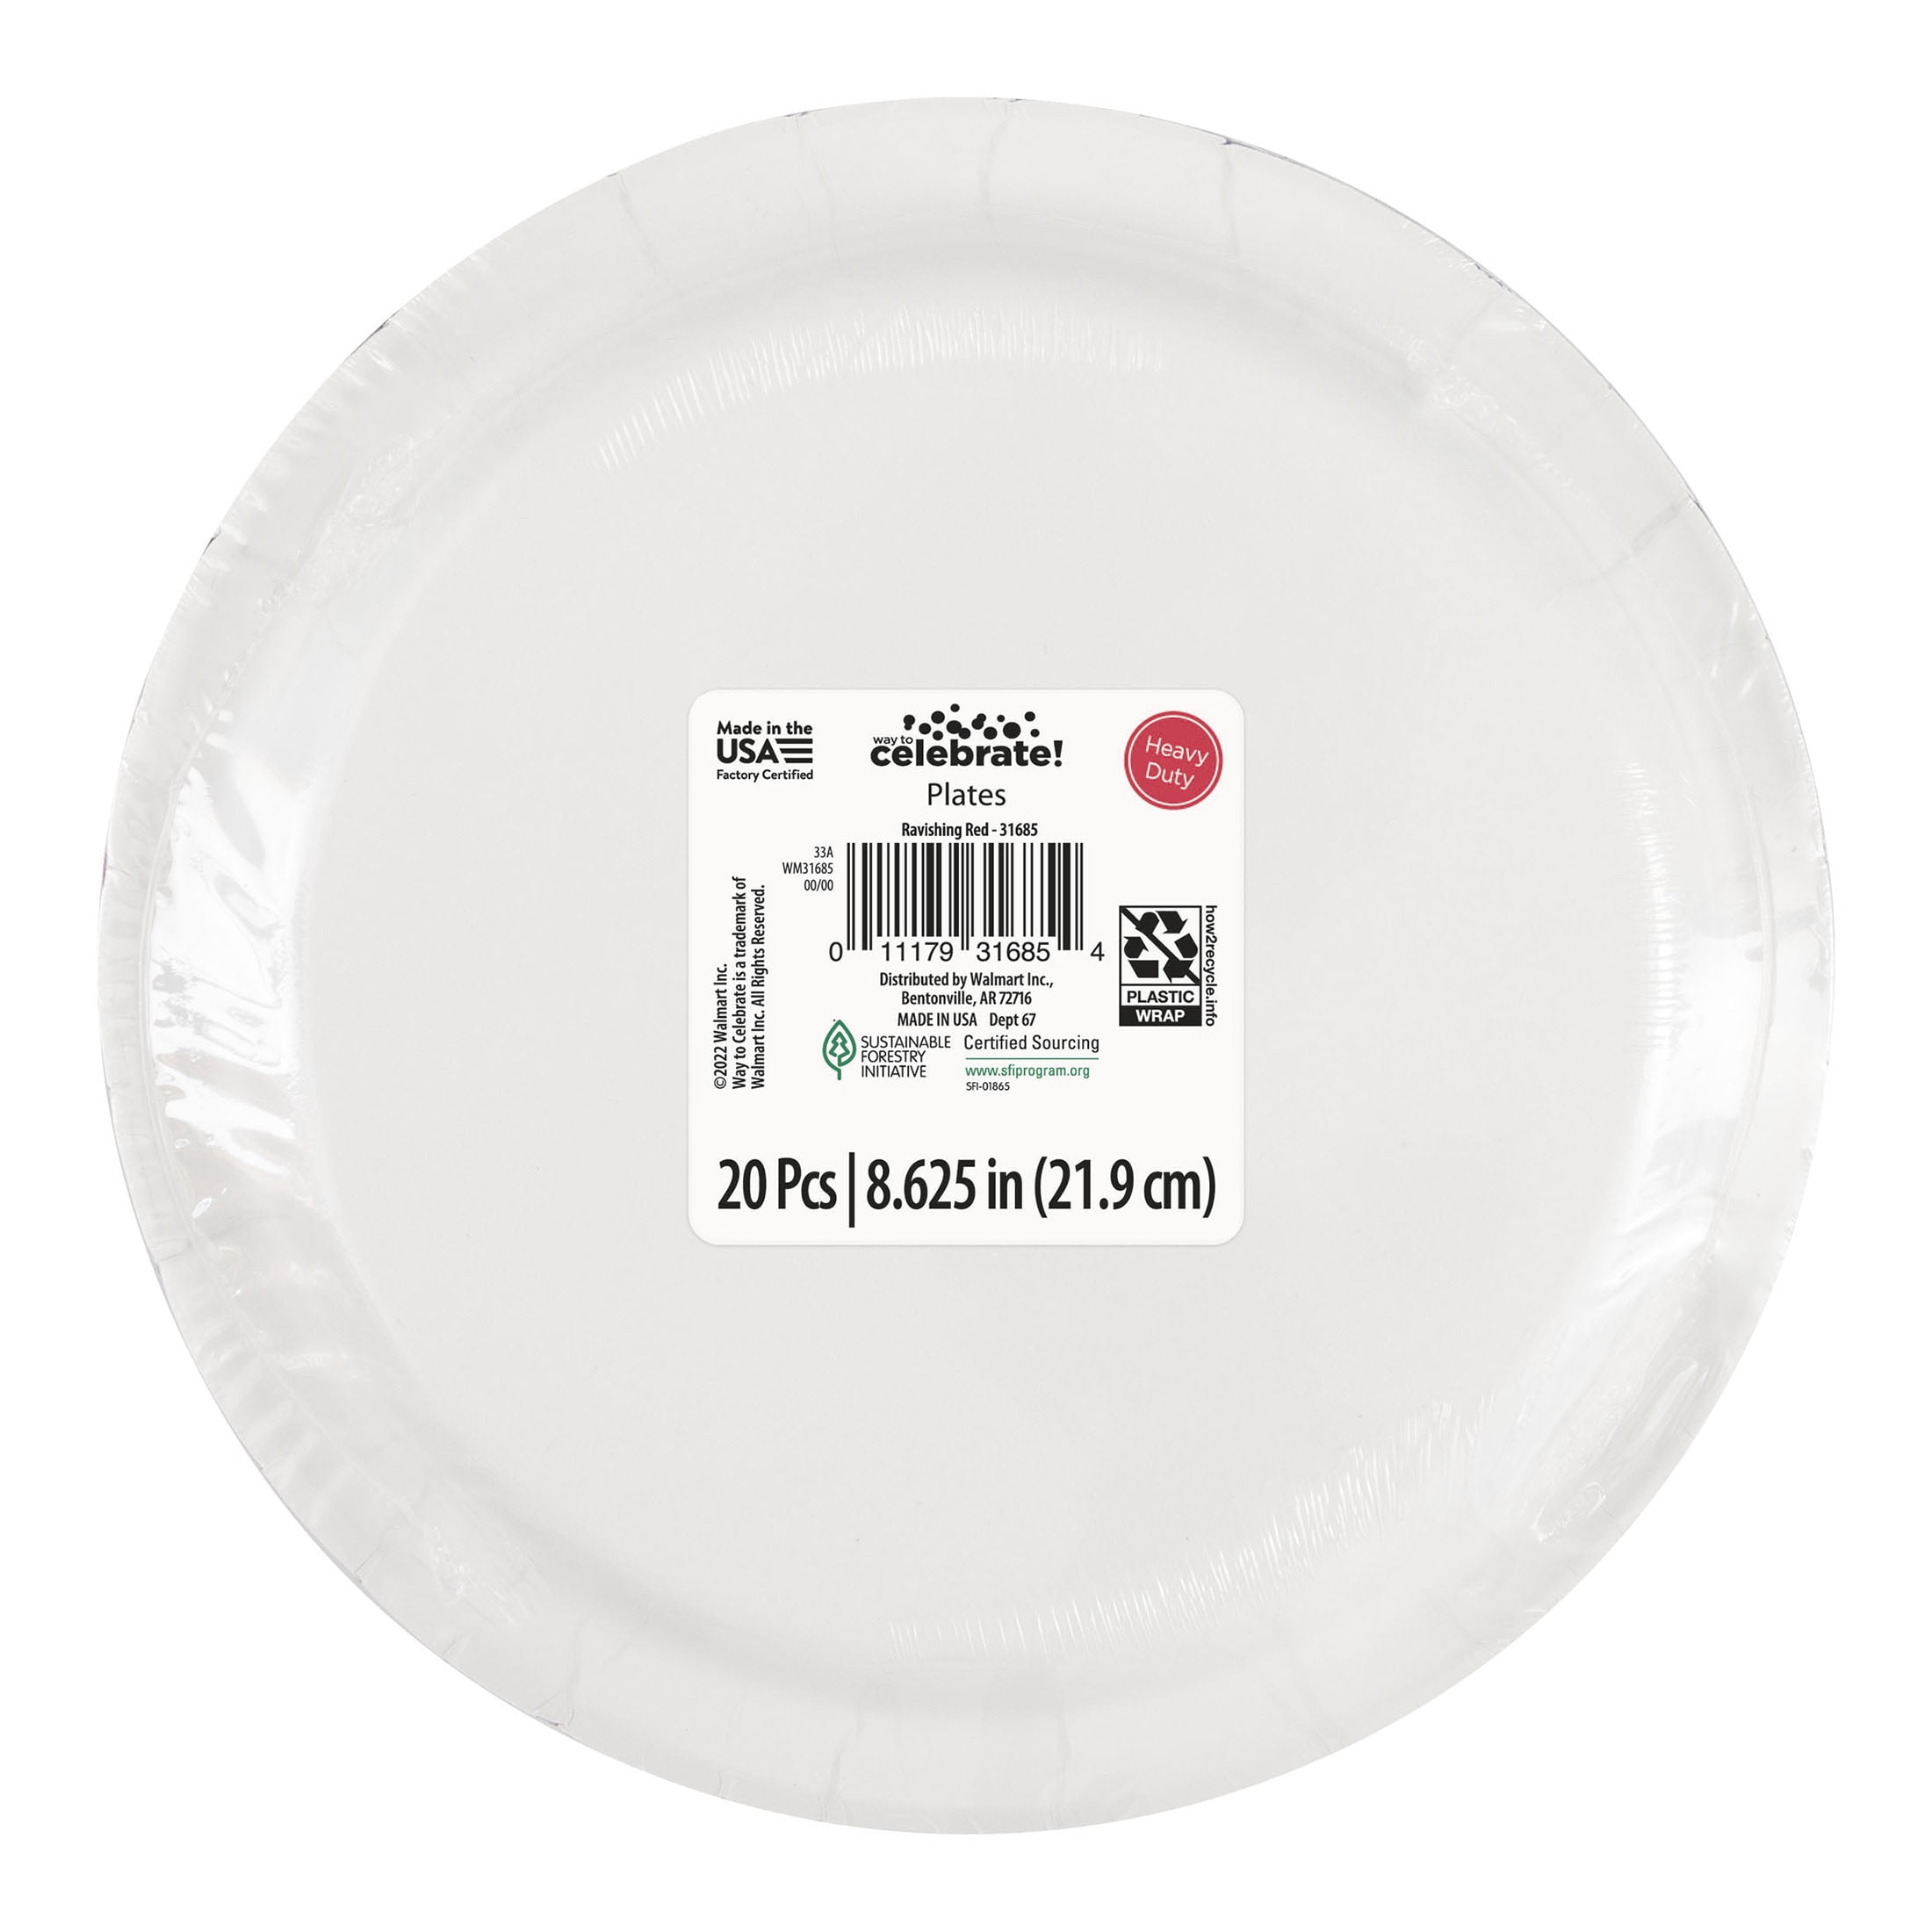 Red Heavy Duty Paper Plates